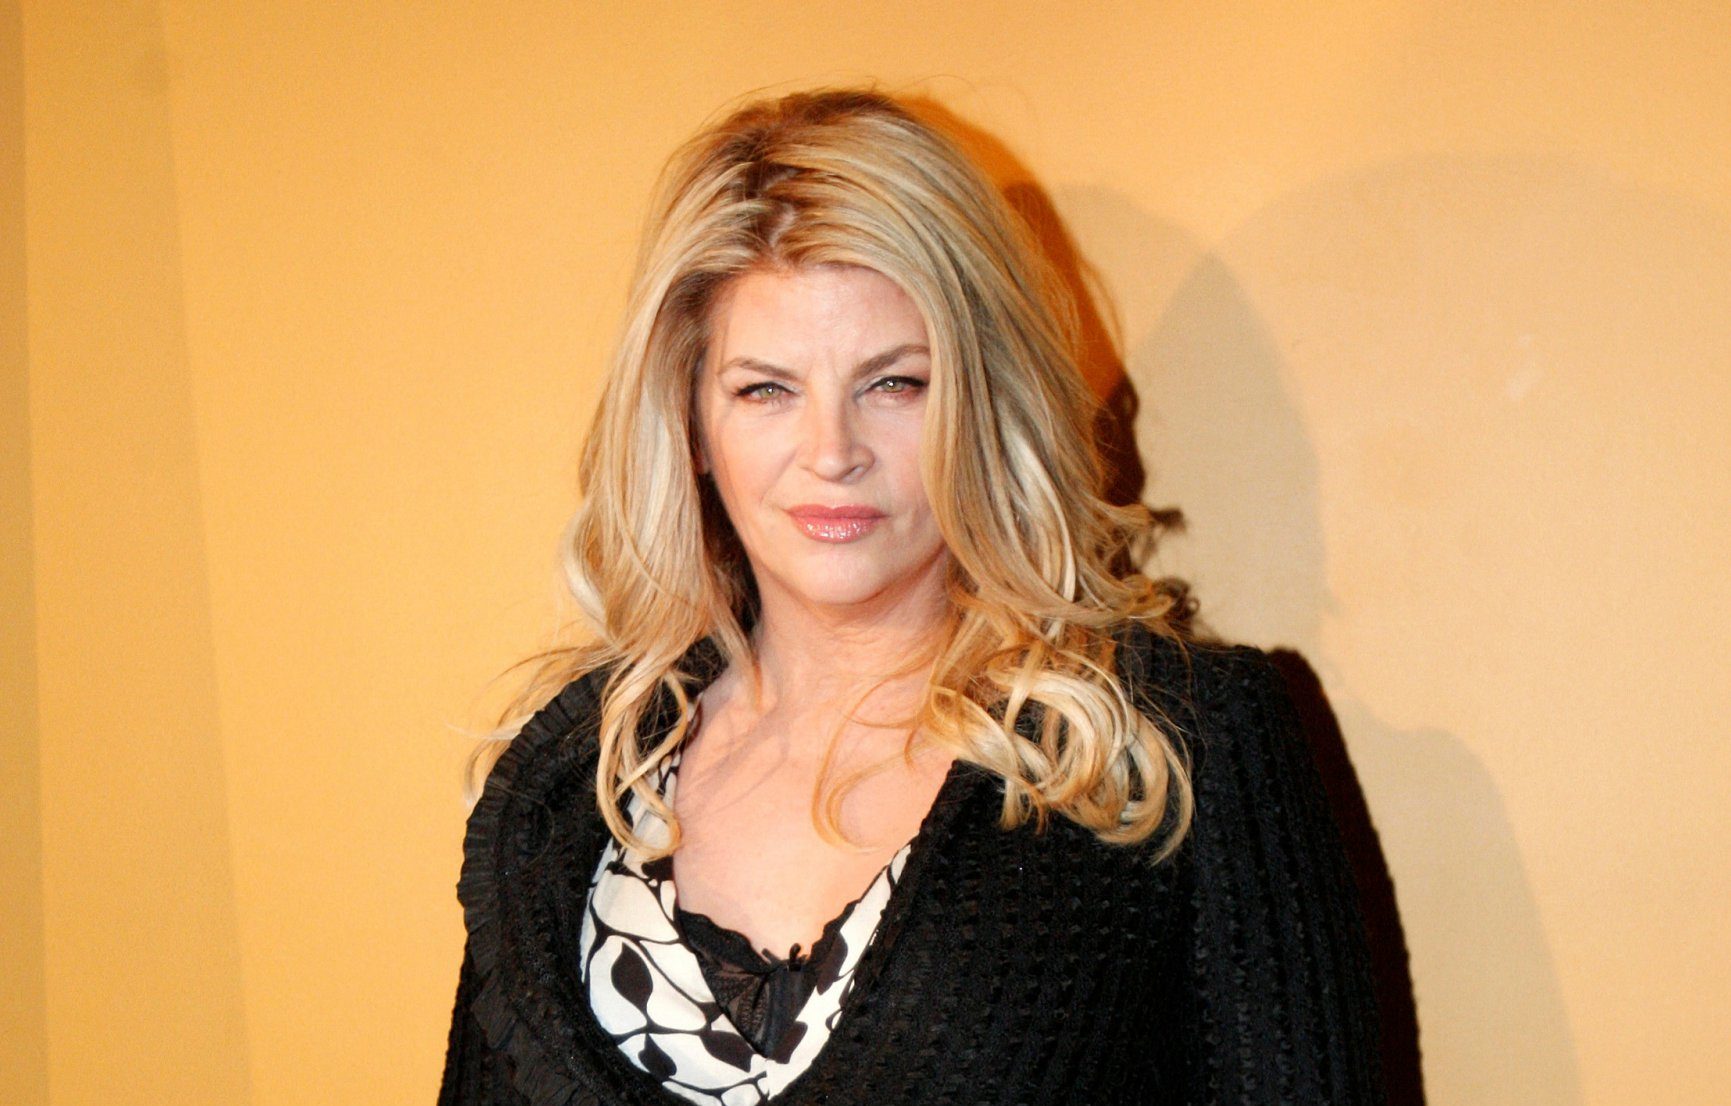 Kirstie Alley regretted revealing bikini body after 75lb weight loss on The Oprah Winfrey Show in 2006: ‘It was so stupid’